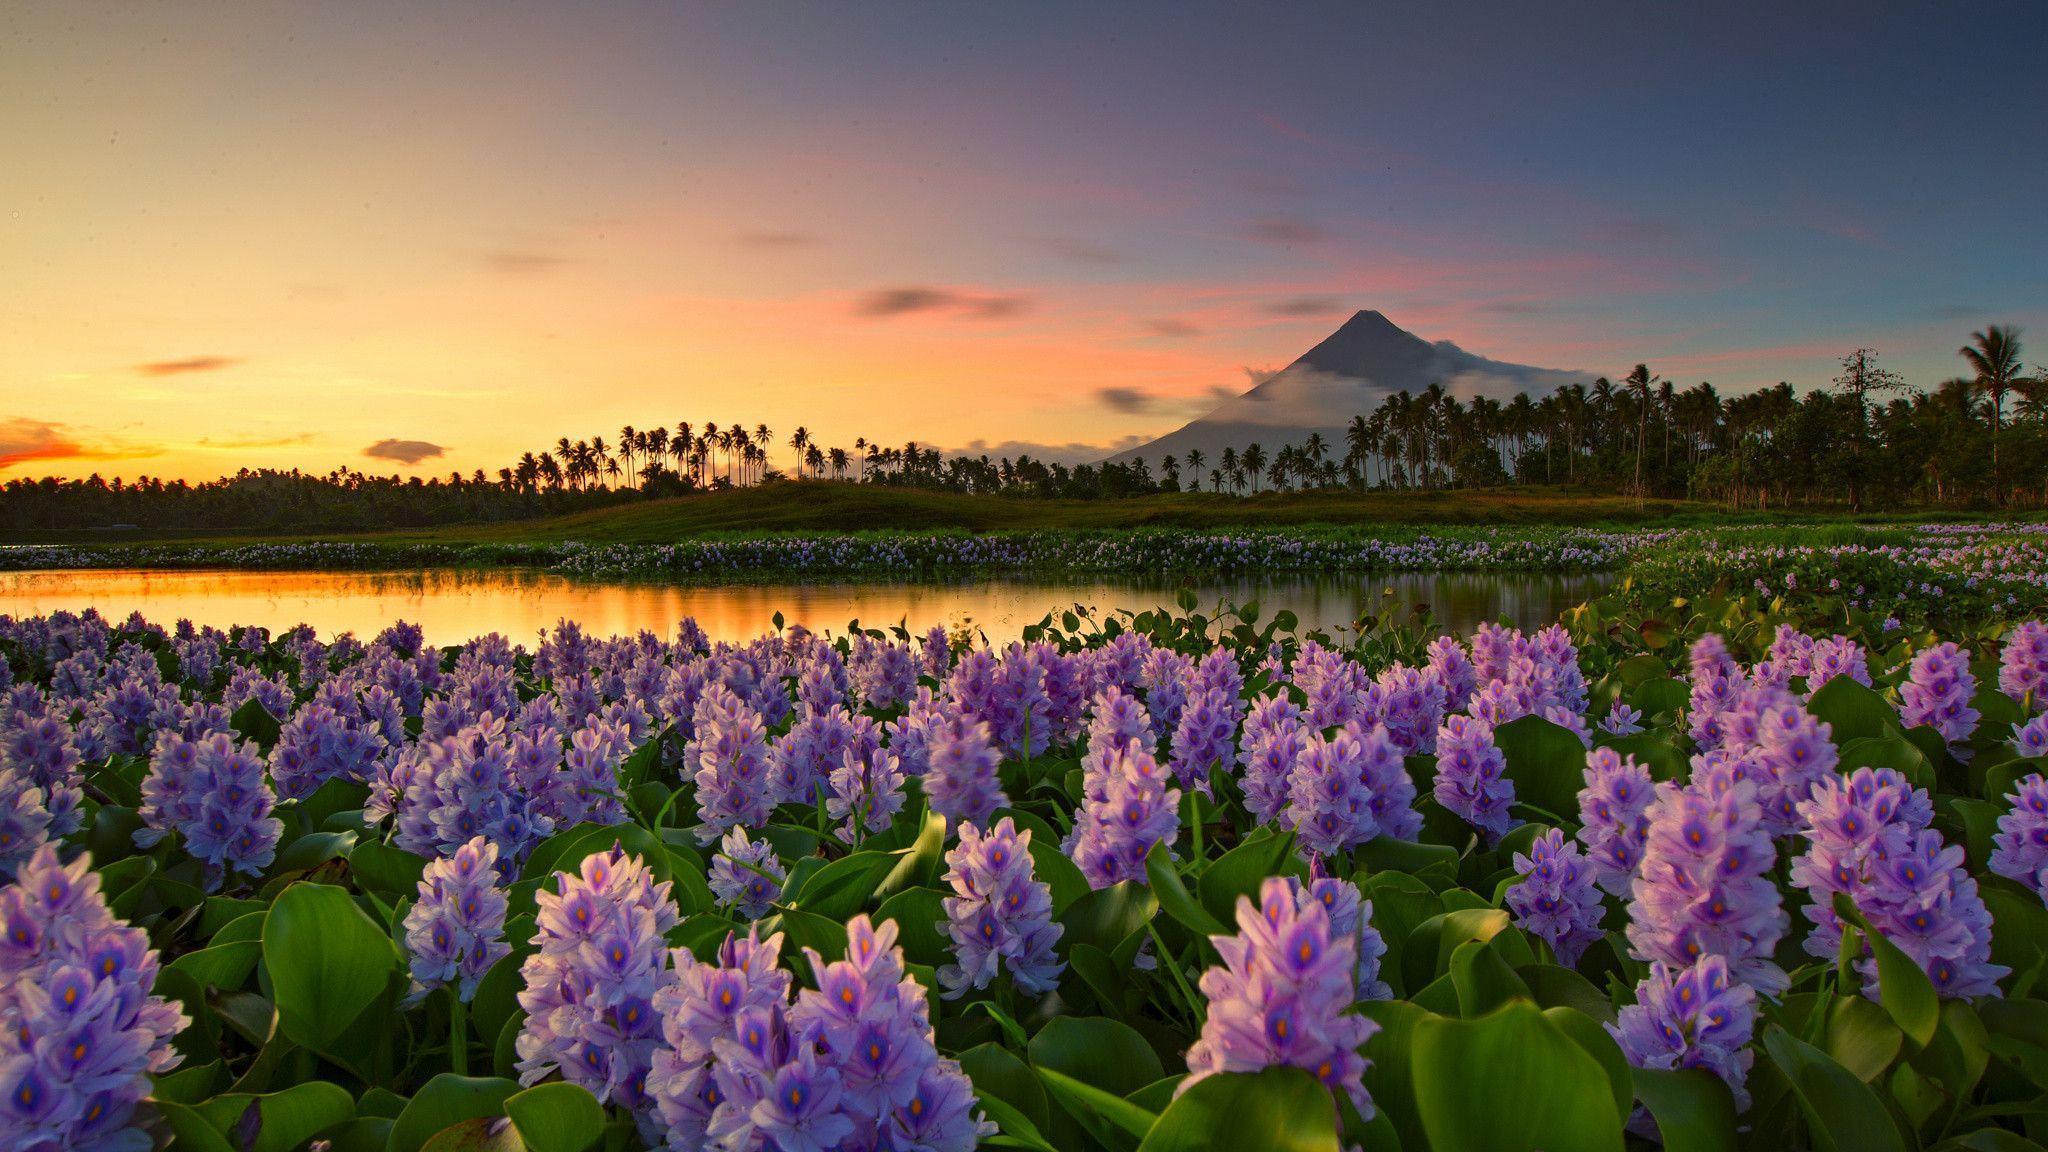 Mayon Volcano at distance, Philippines